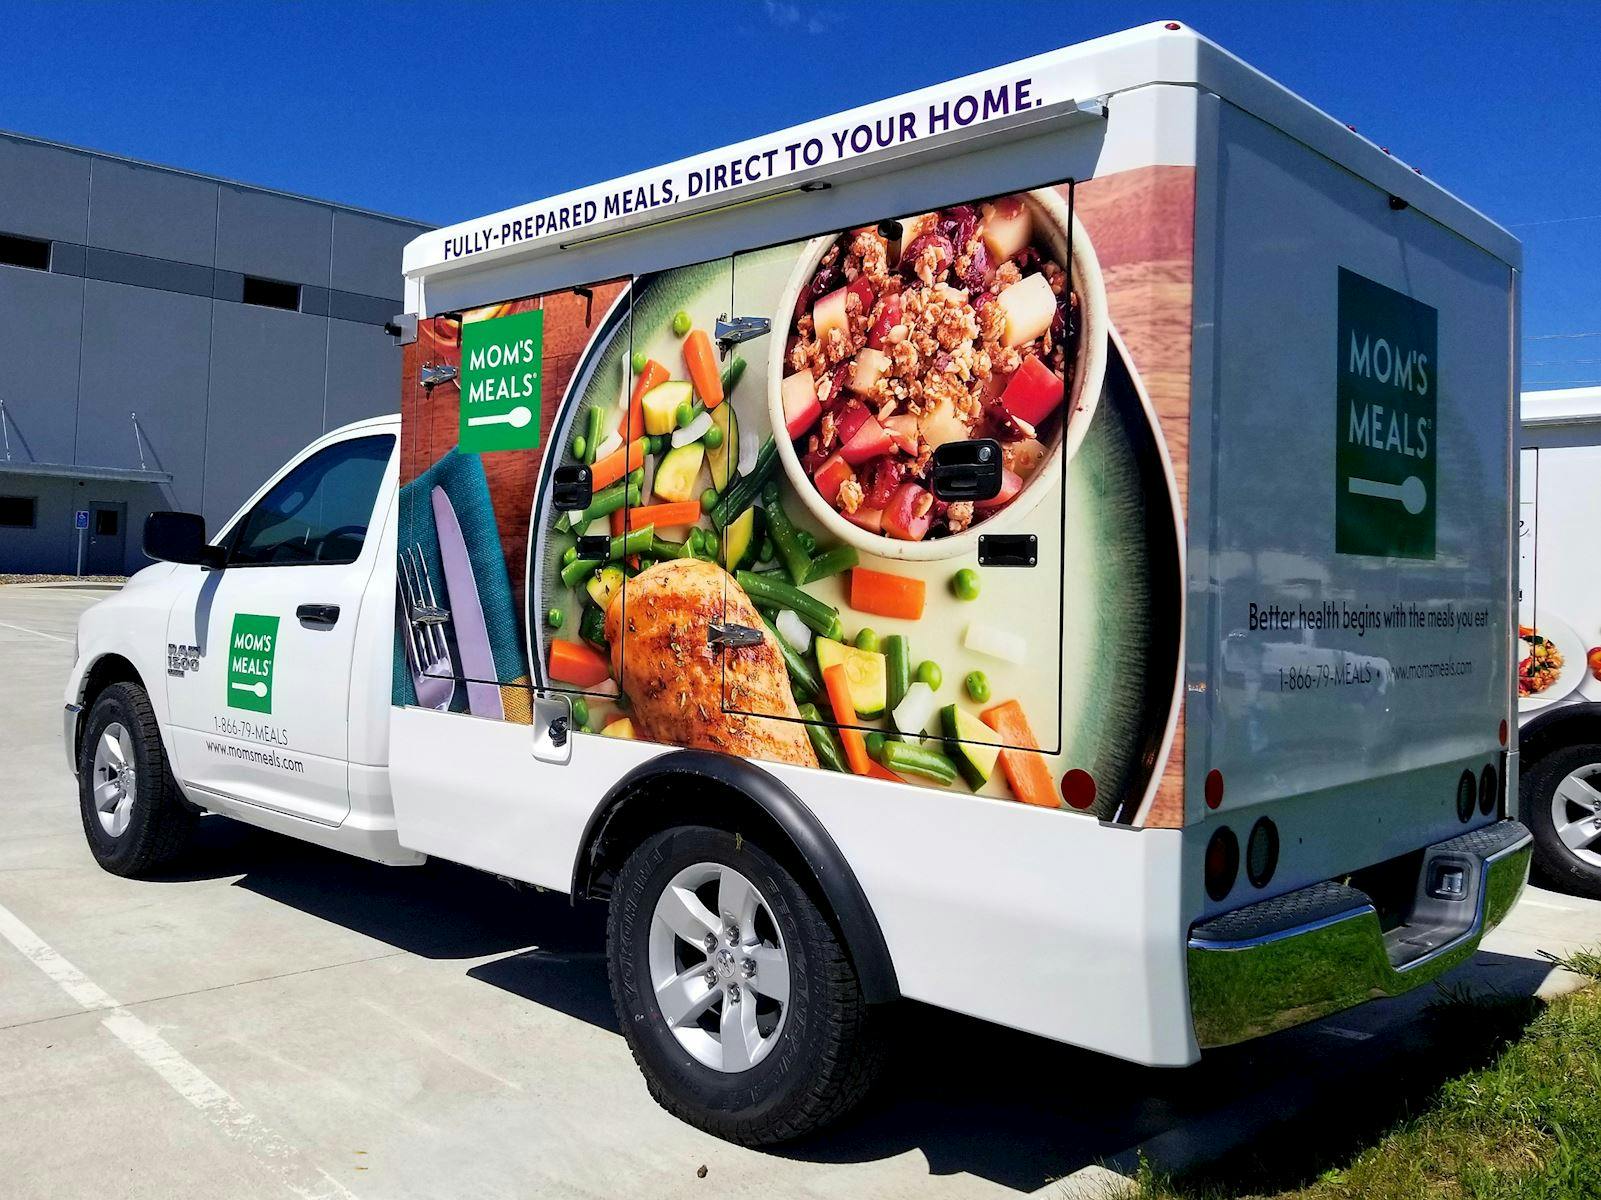 Mom's Meals home delivery truck